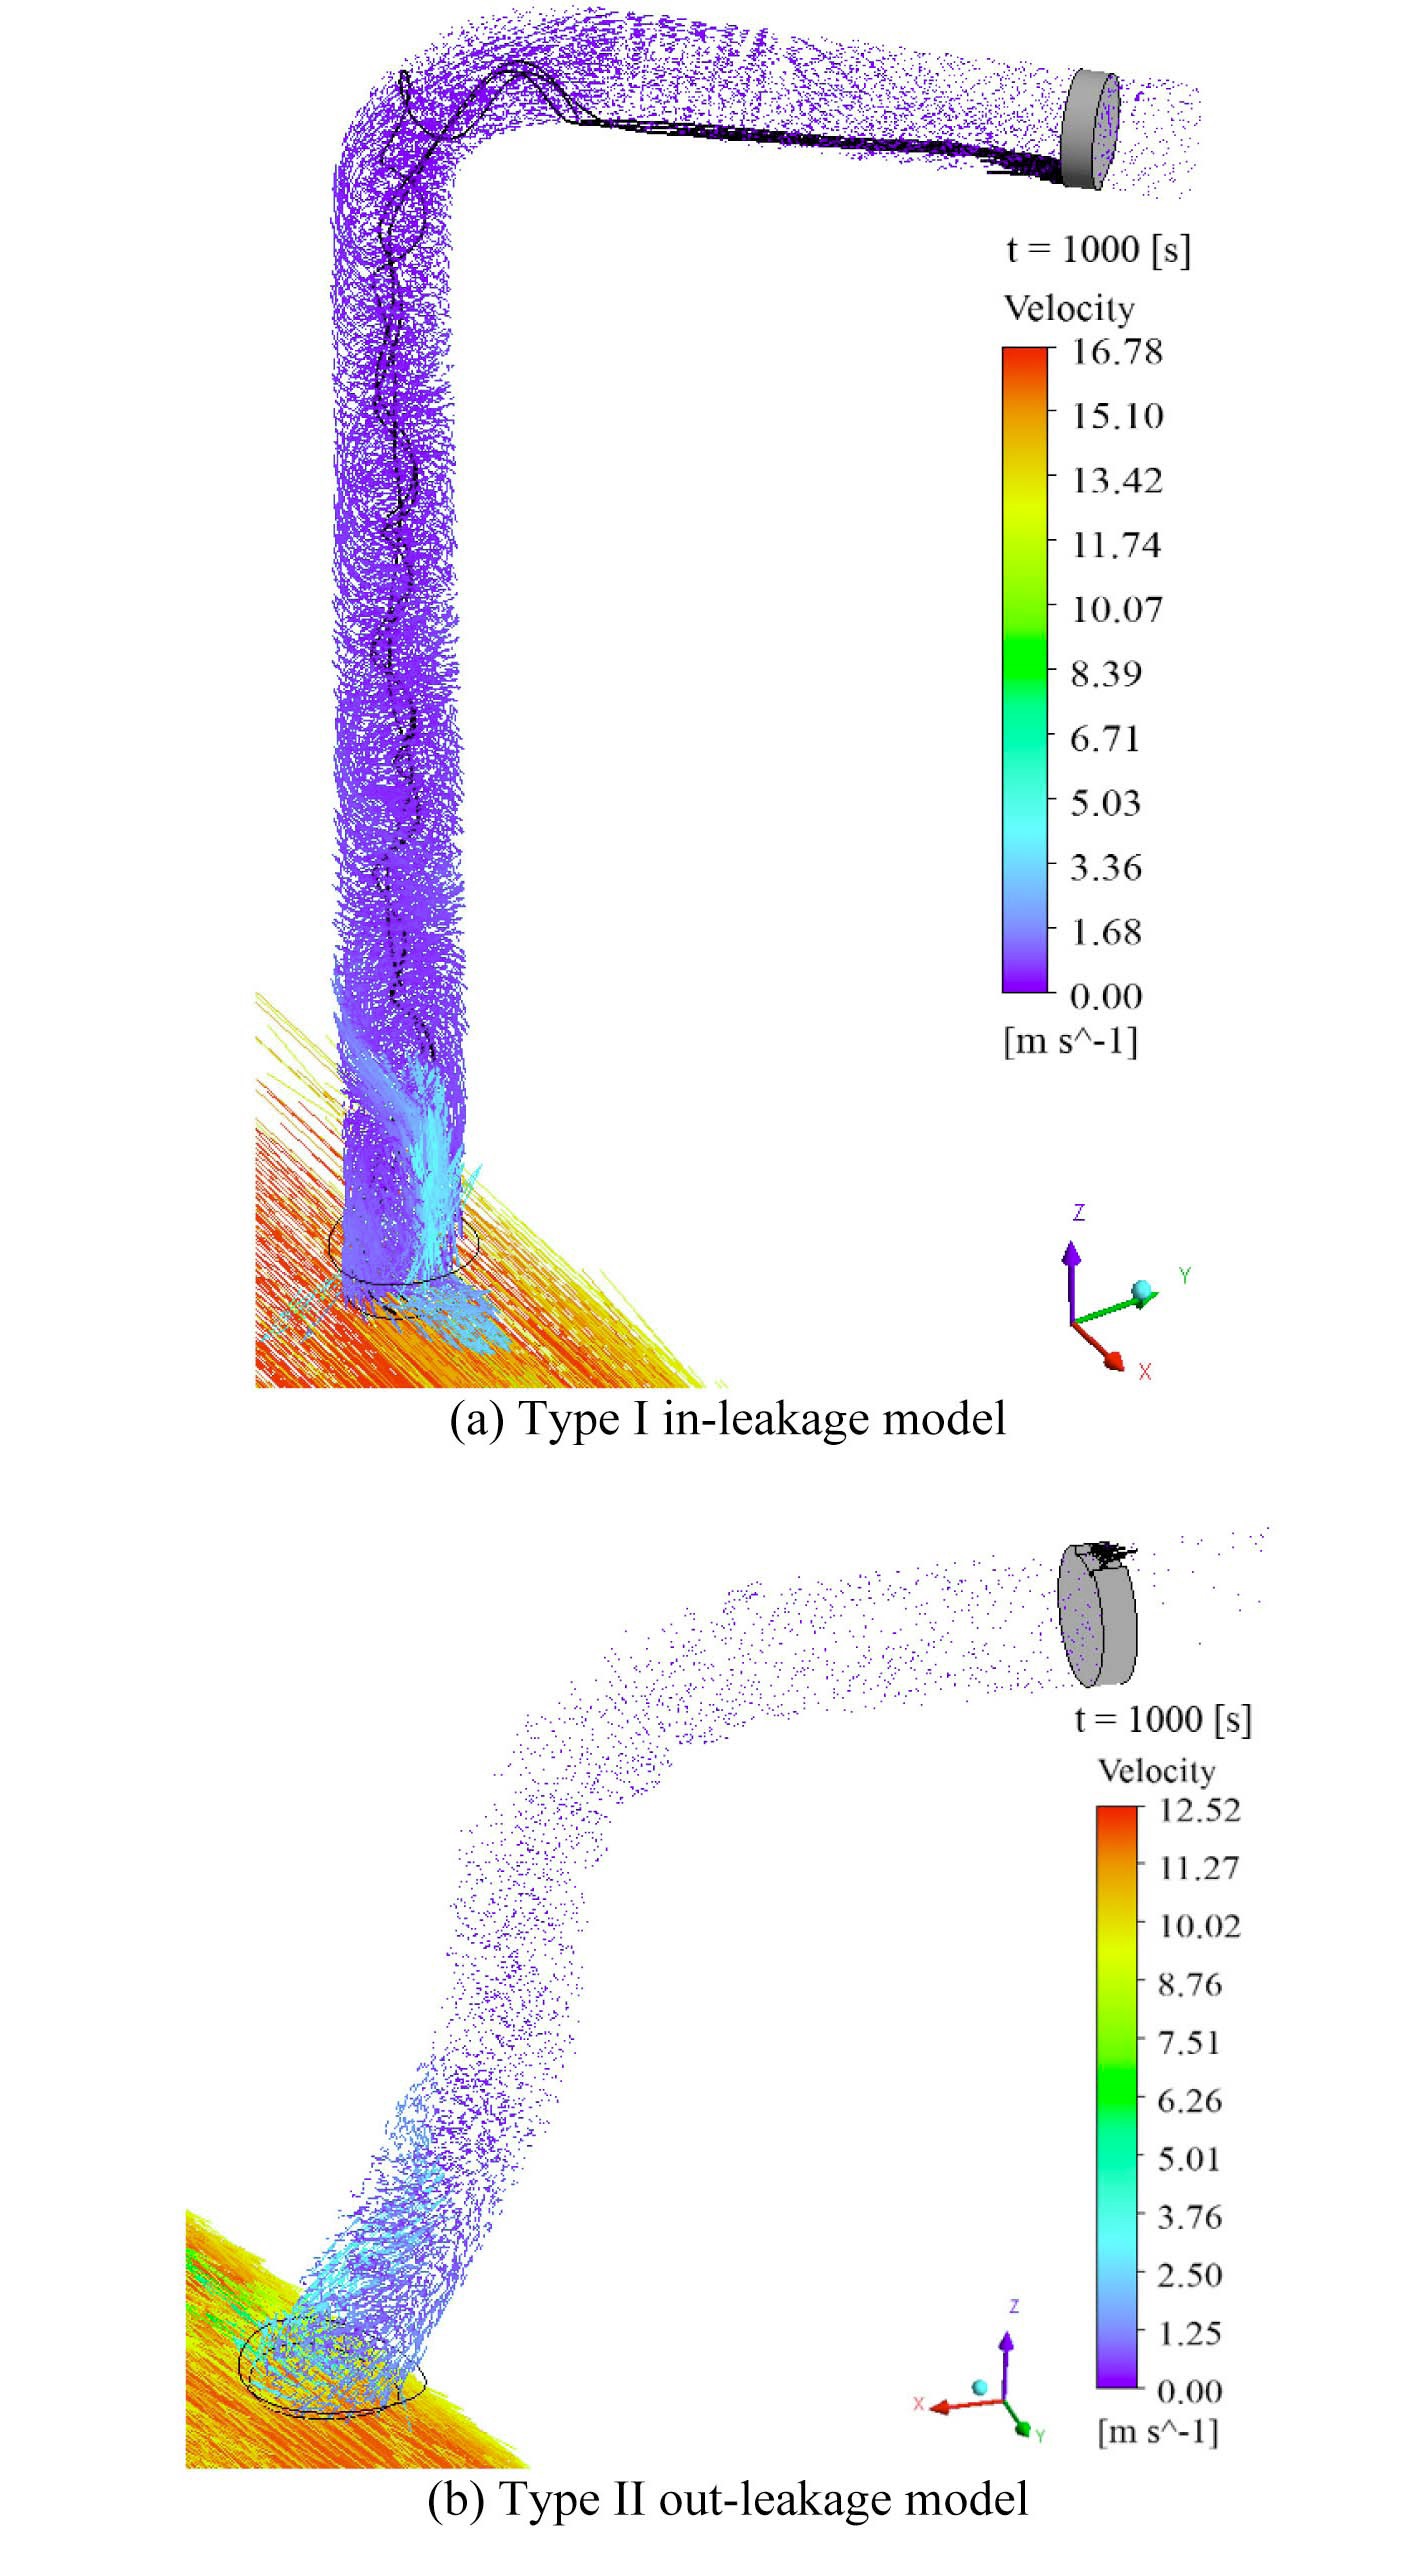 Primary Flow Velocity Vectors and Steam Lines in Leakage Models